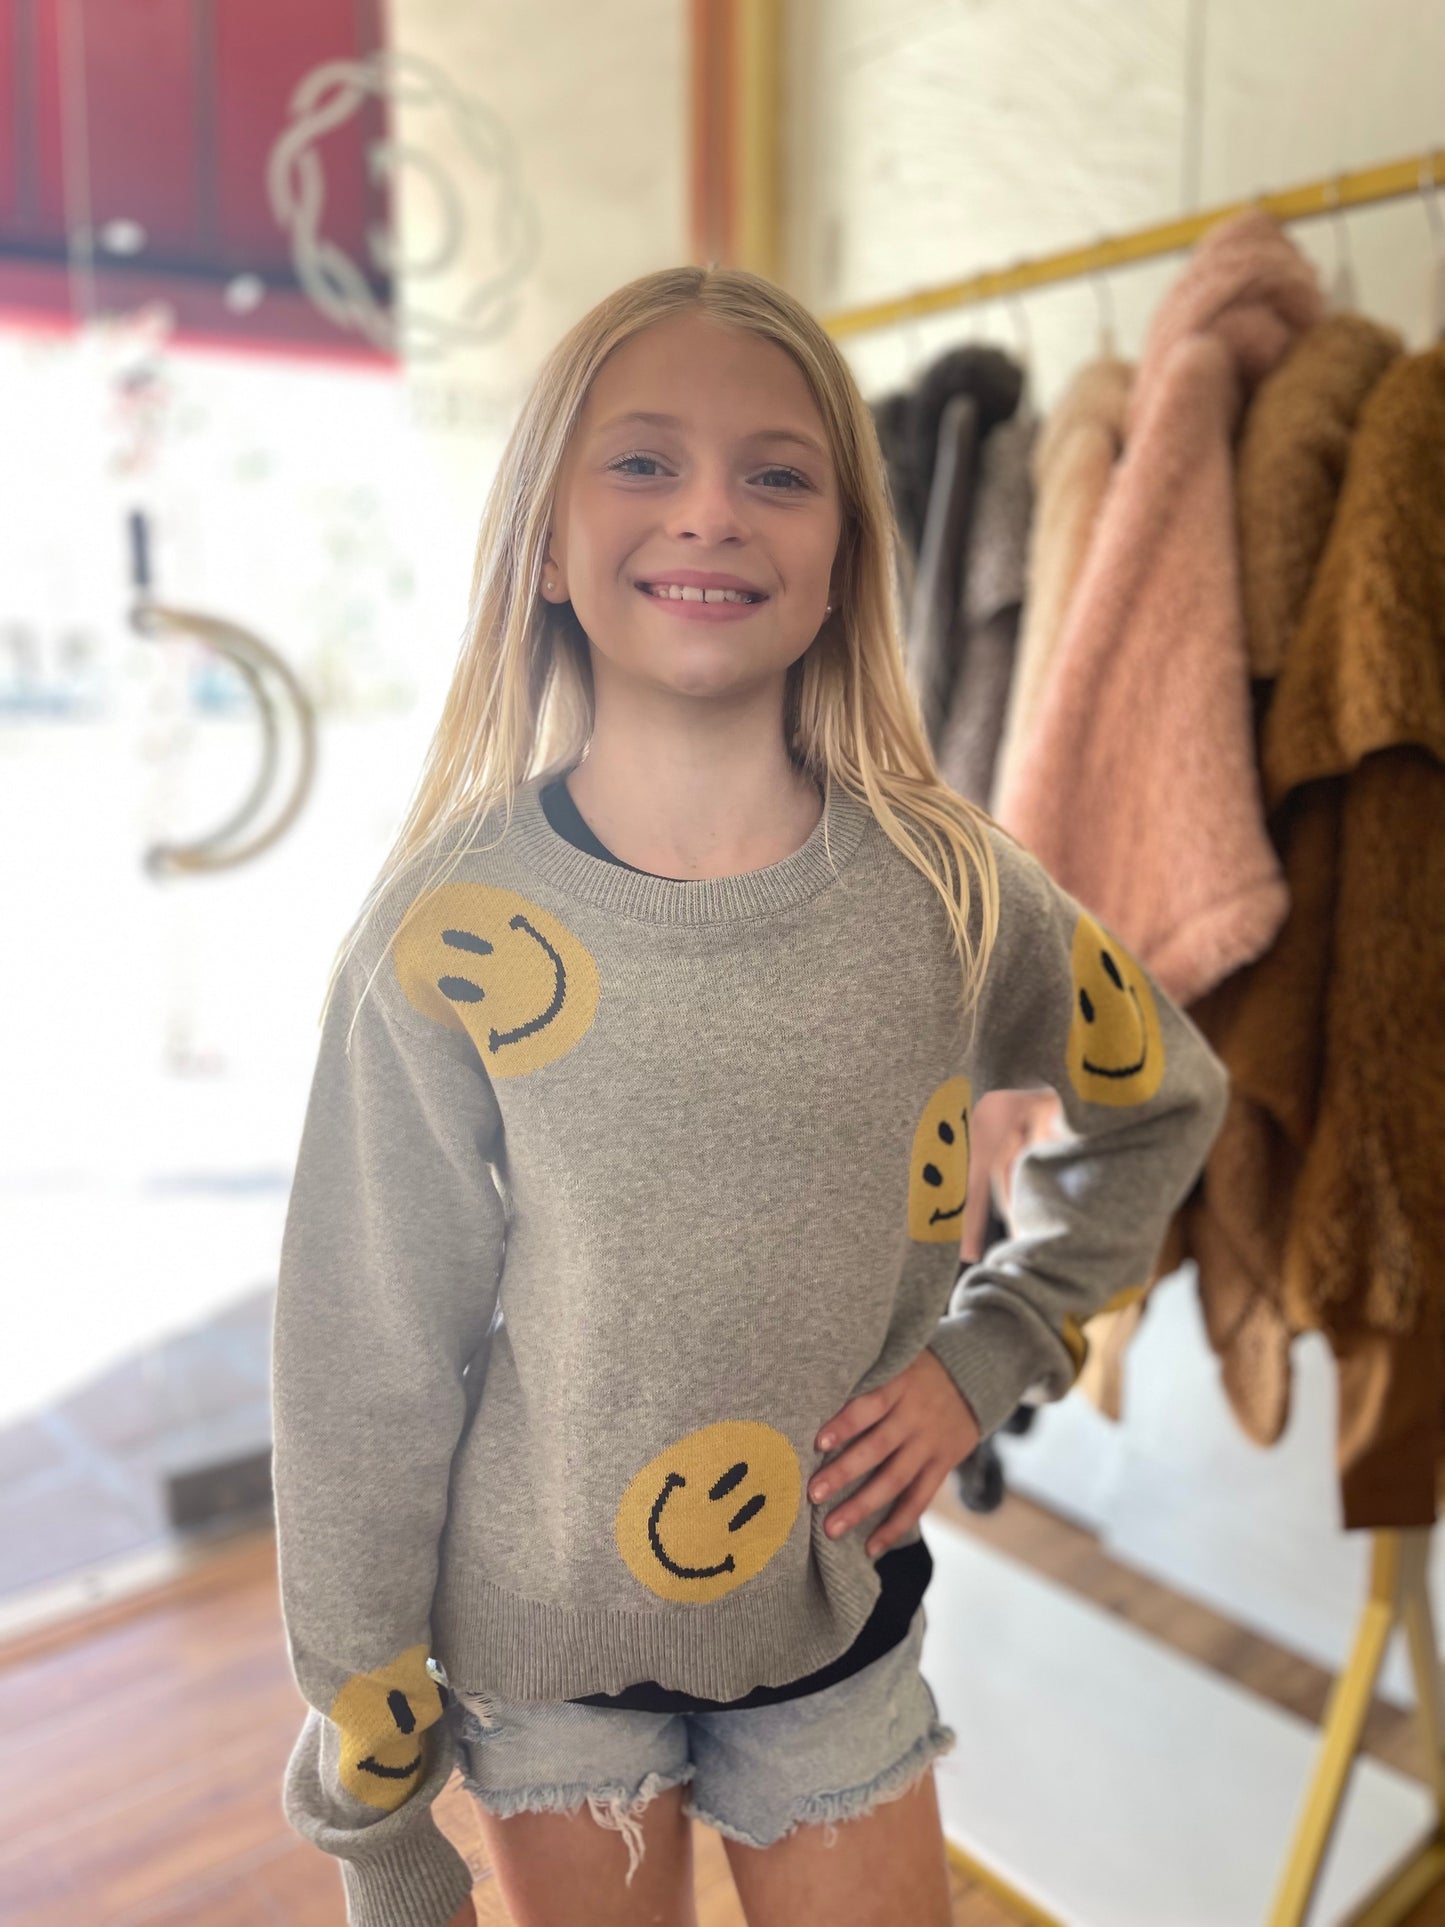 Smiley Face Sweaterv(4-6x)